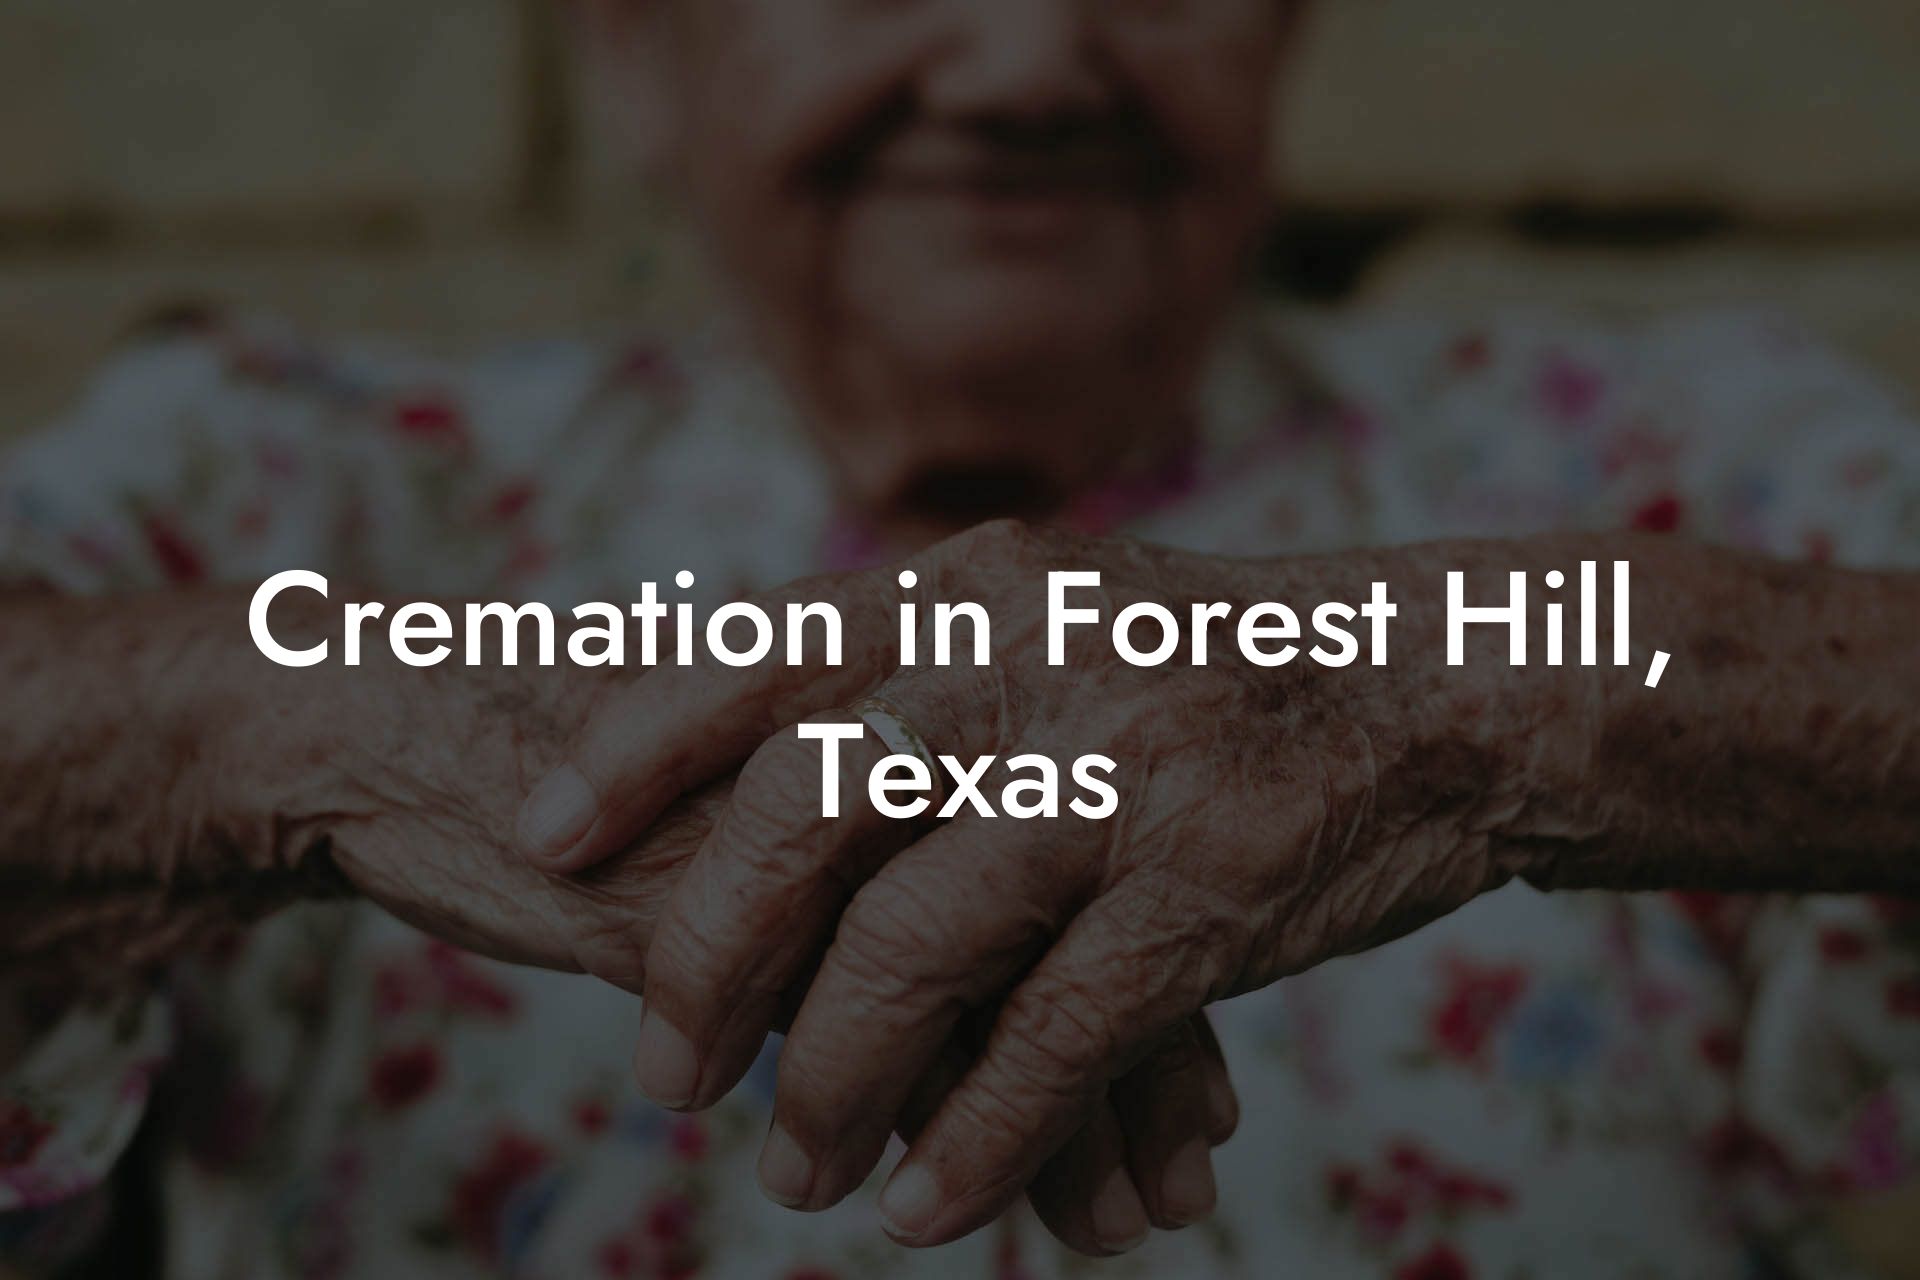 Cremation in Forest Hill, Texas